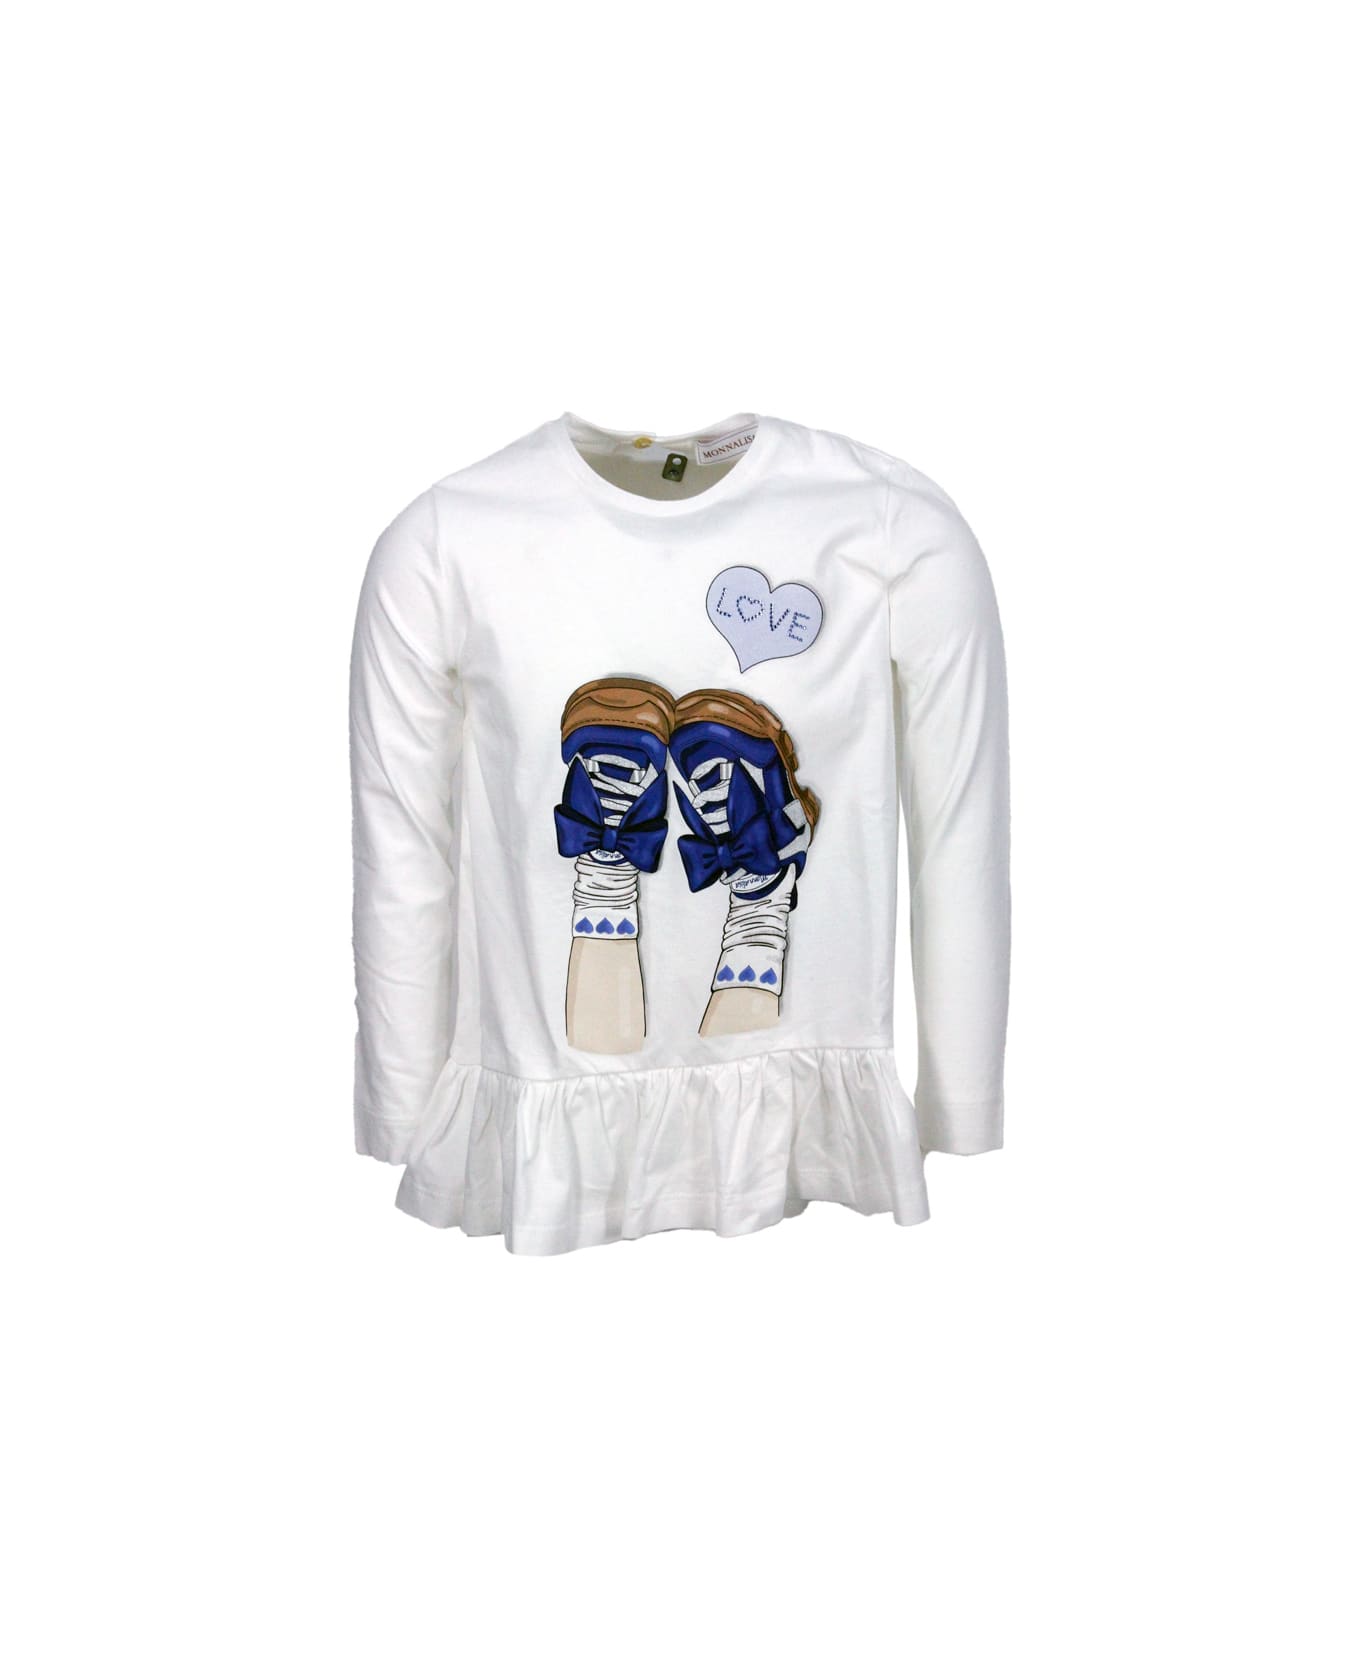 Monnalisa Long-sleeved Crew Neck T-shirt With Sneackers Print - White